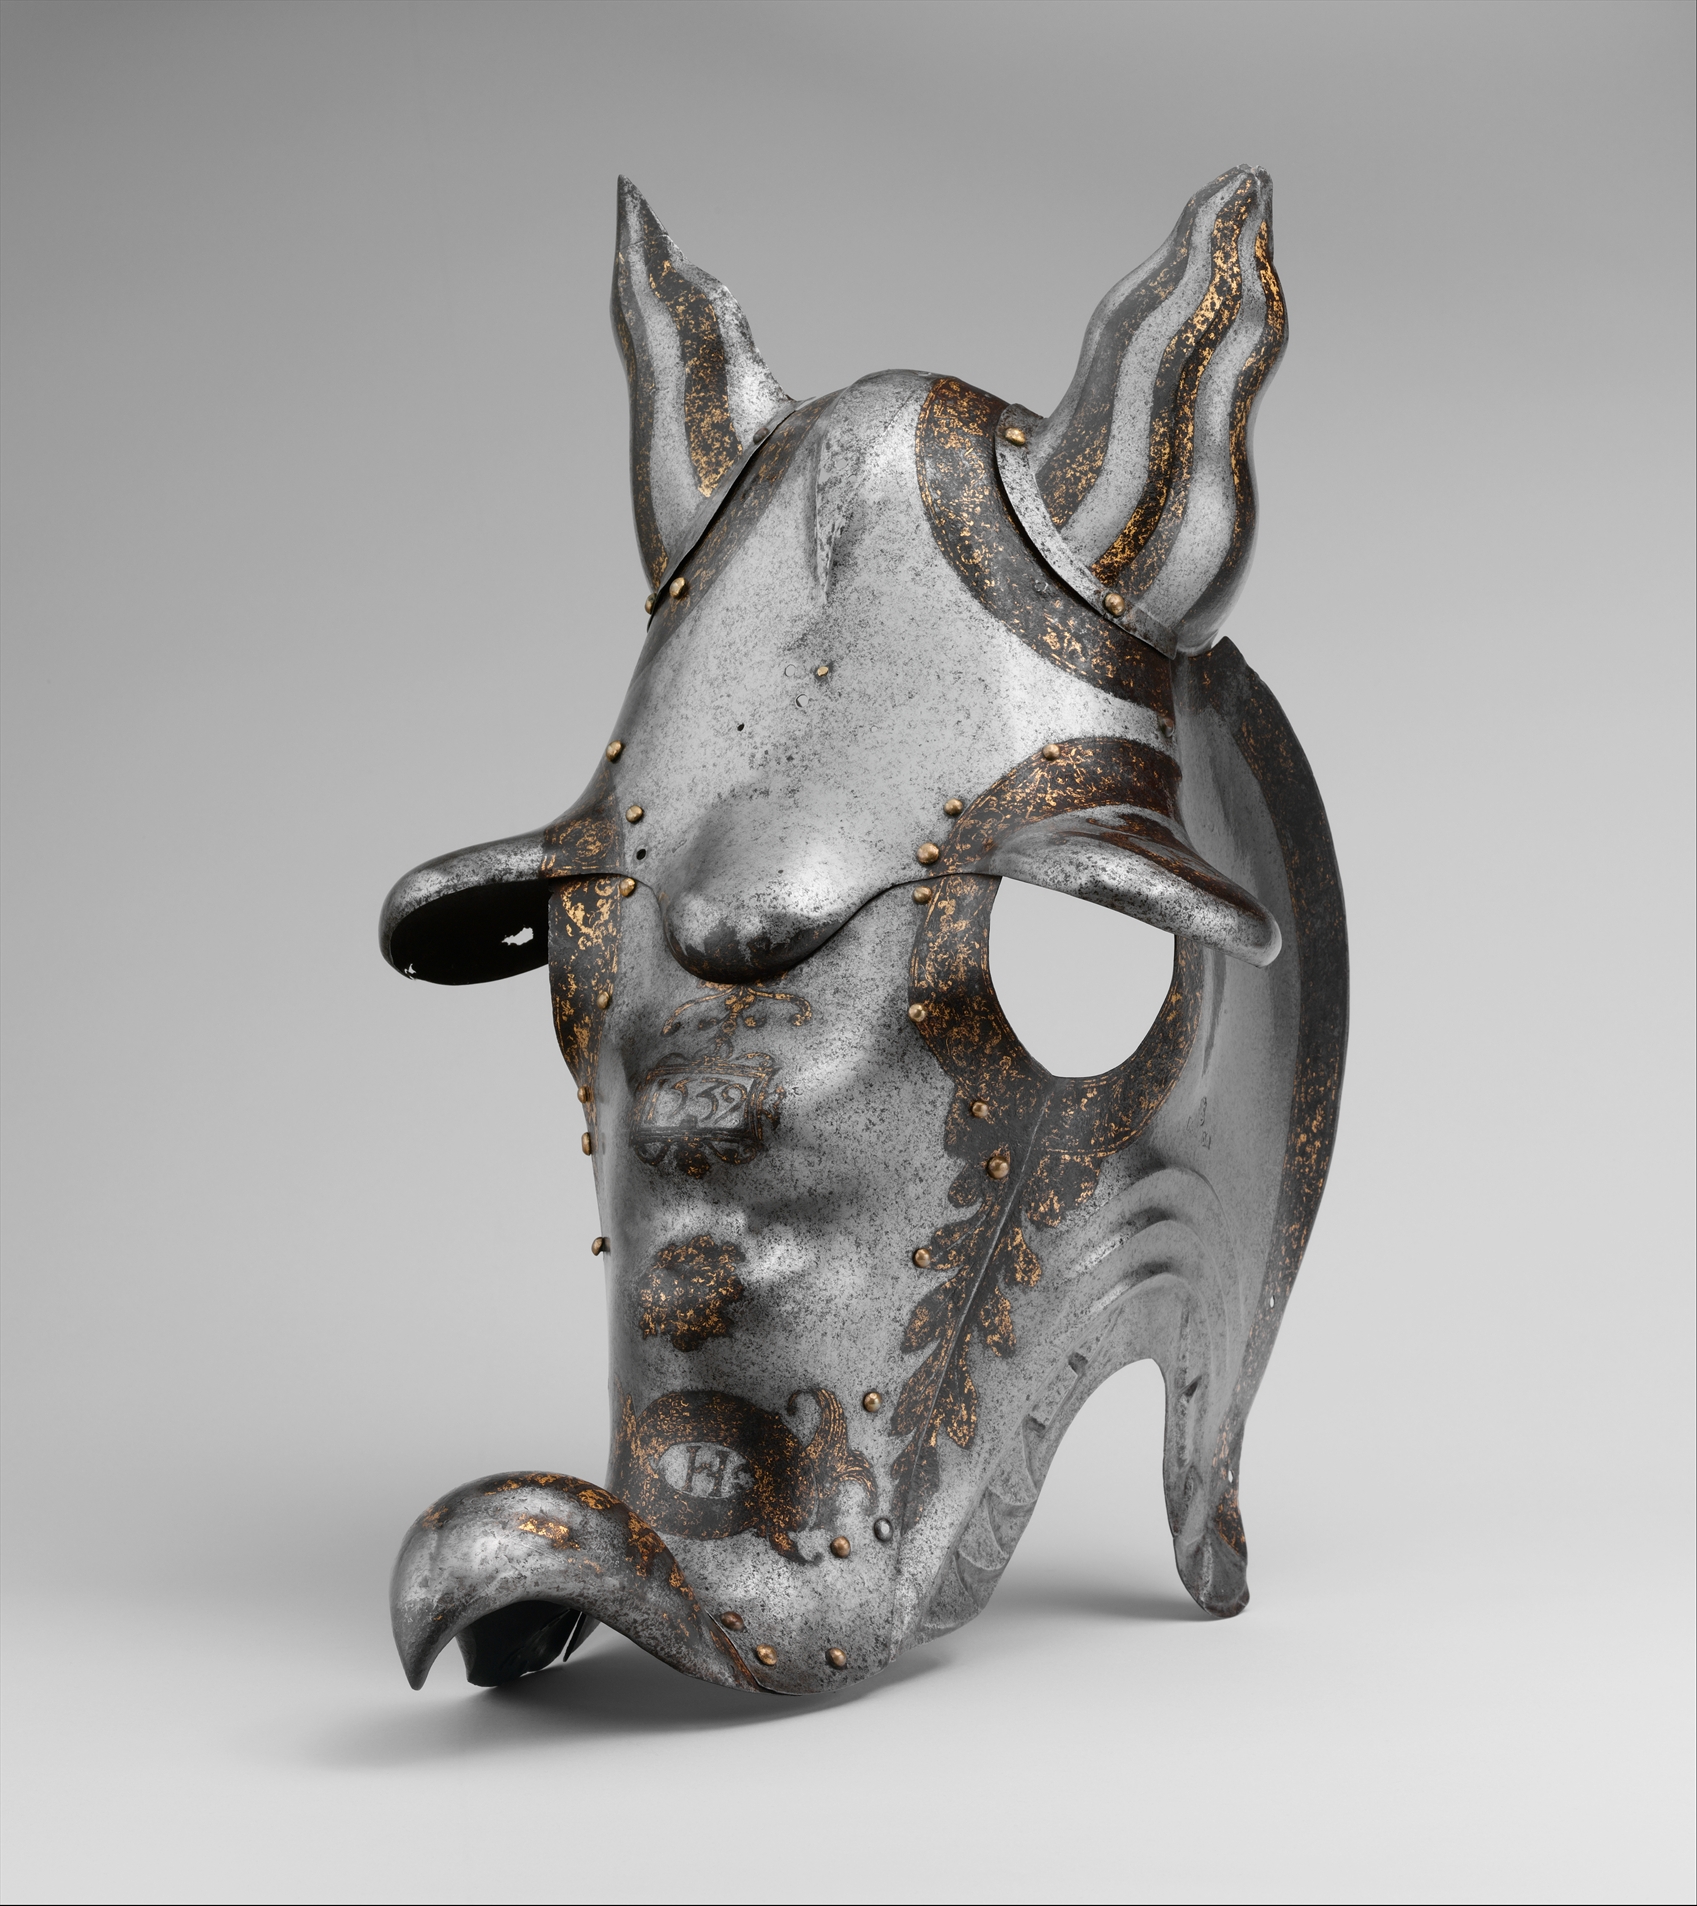 Demi-Chanfron, c. 1550. The chanfron, head defense for a horse, was  introduced in the 1300s. It included two side pieces to protect the cheeks.  In the 16th and 17th centuries, when armor